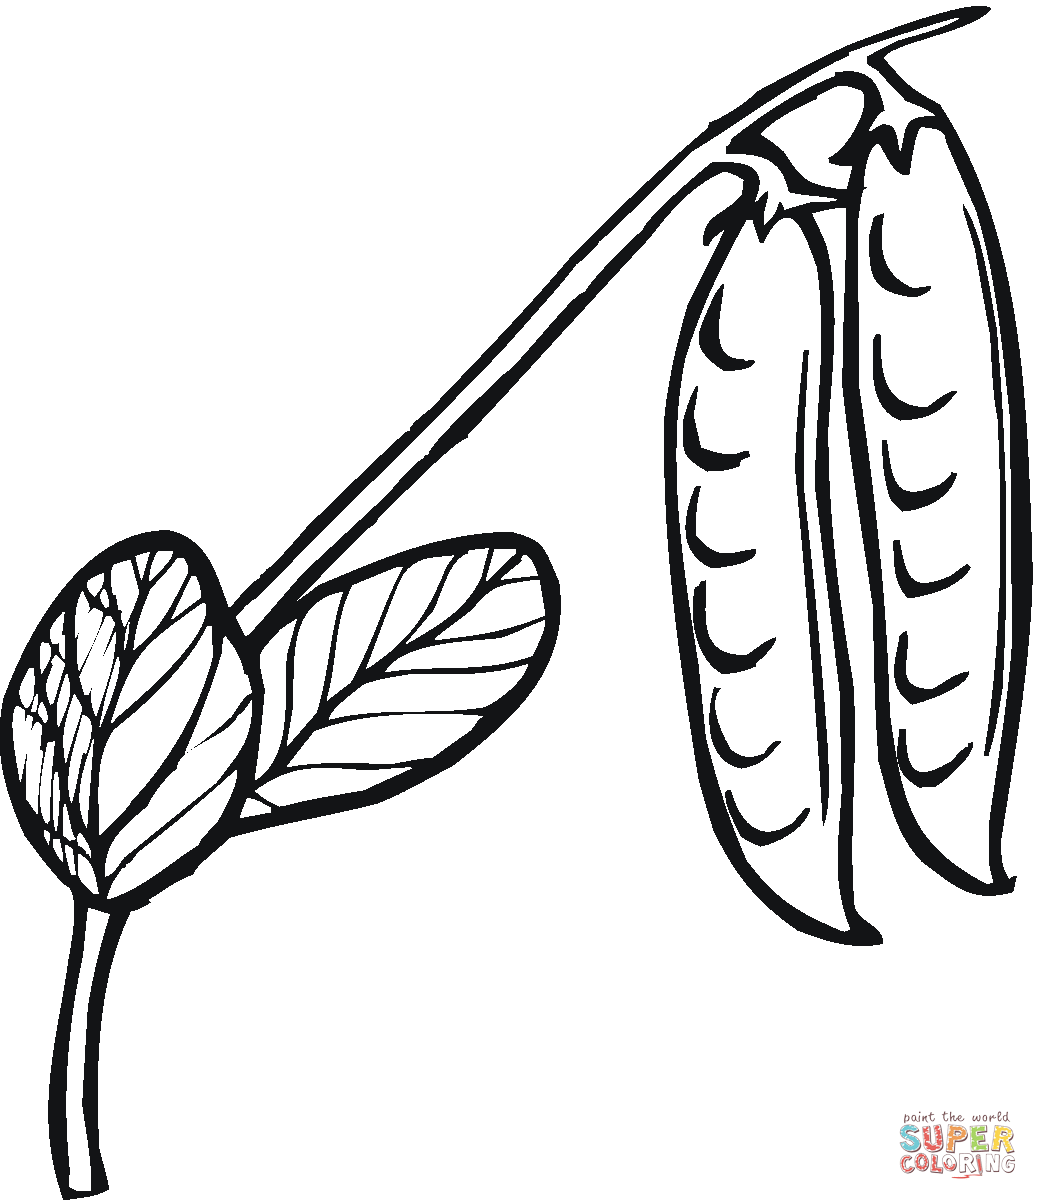 Peas coloring page free printable coloring pages